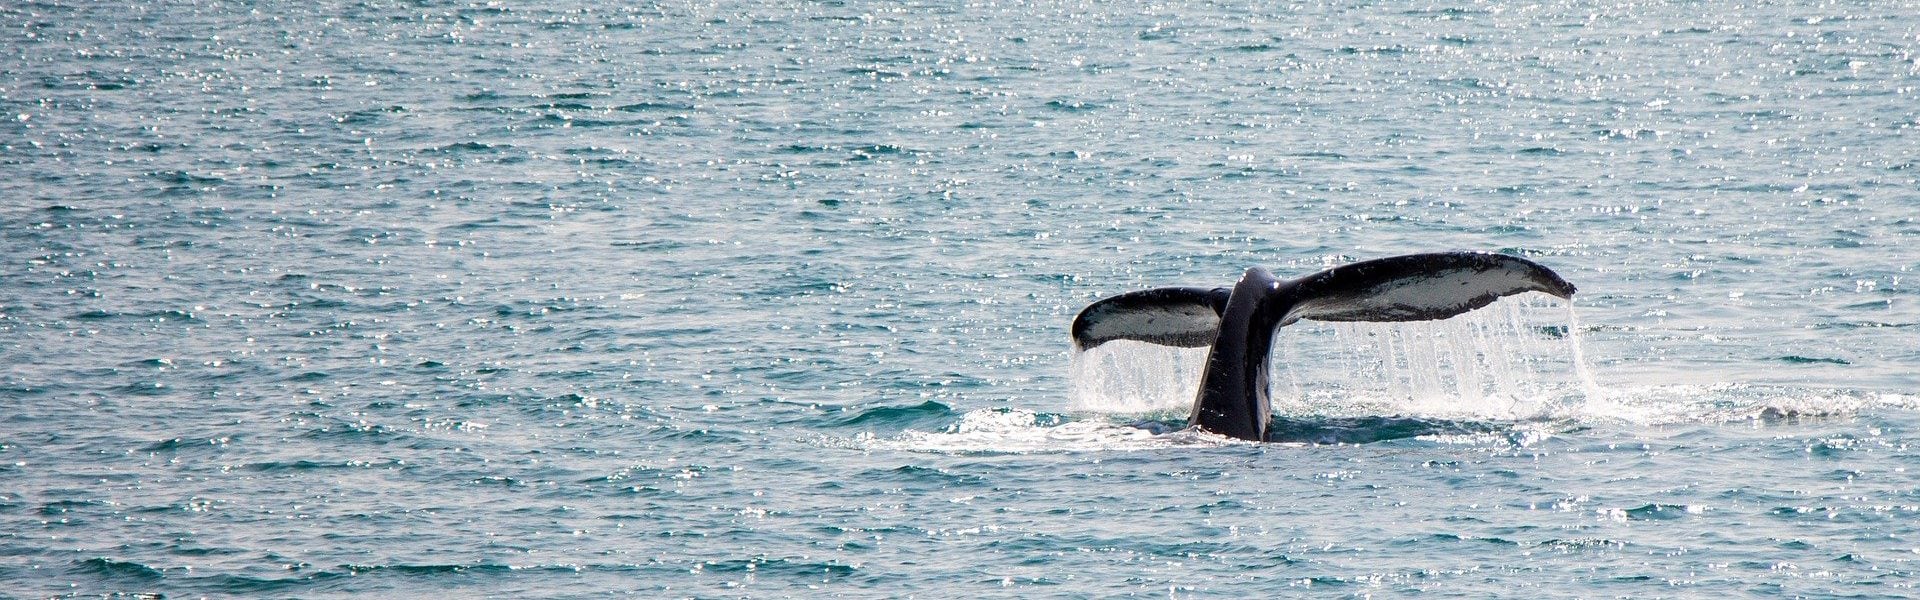 whale-watching-4430682_1920